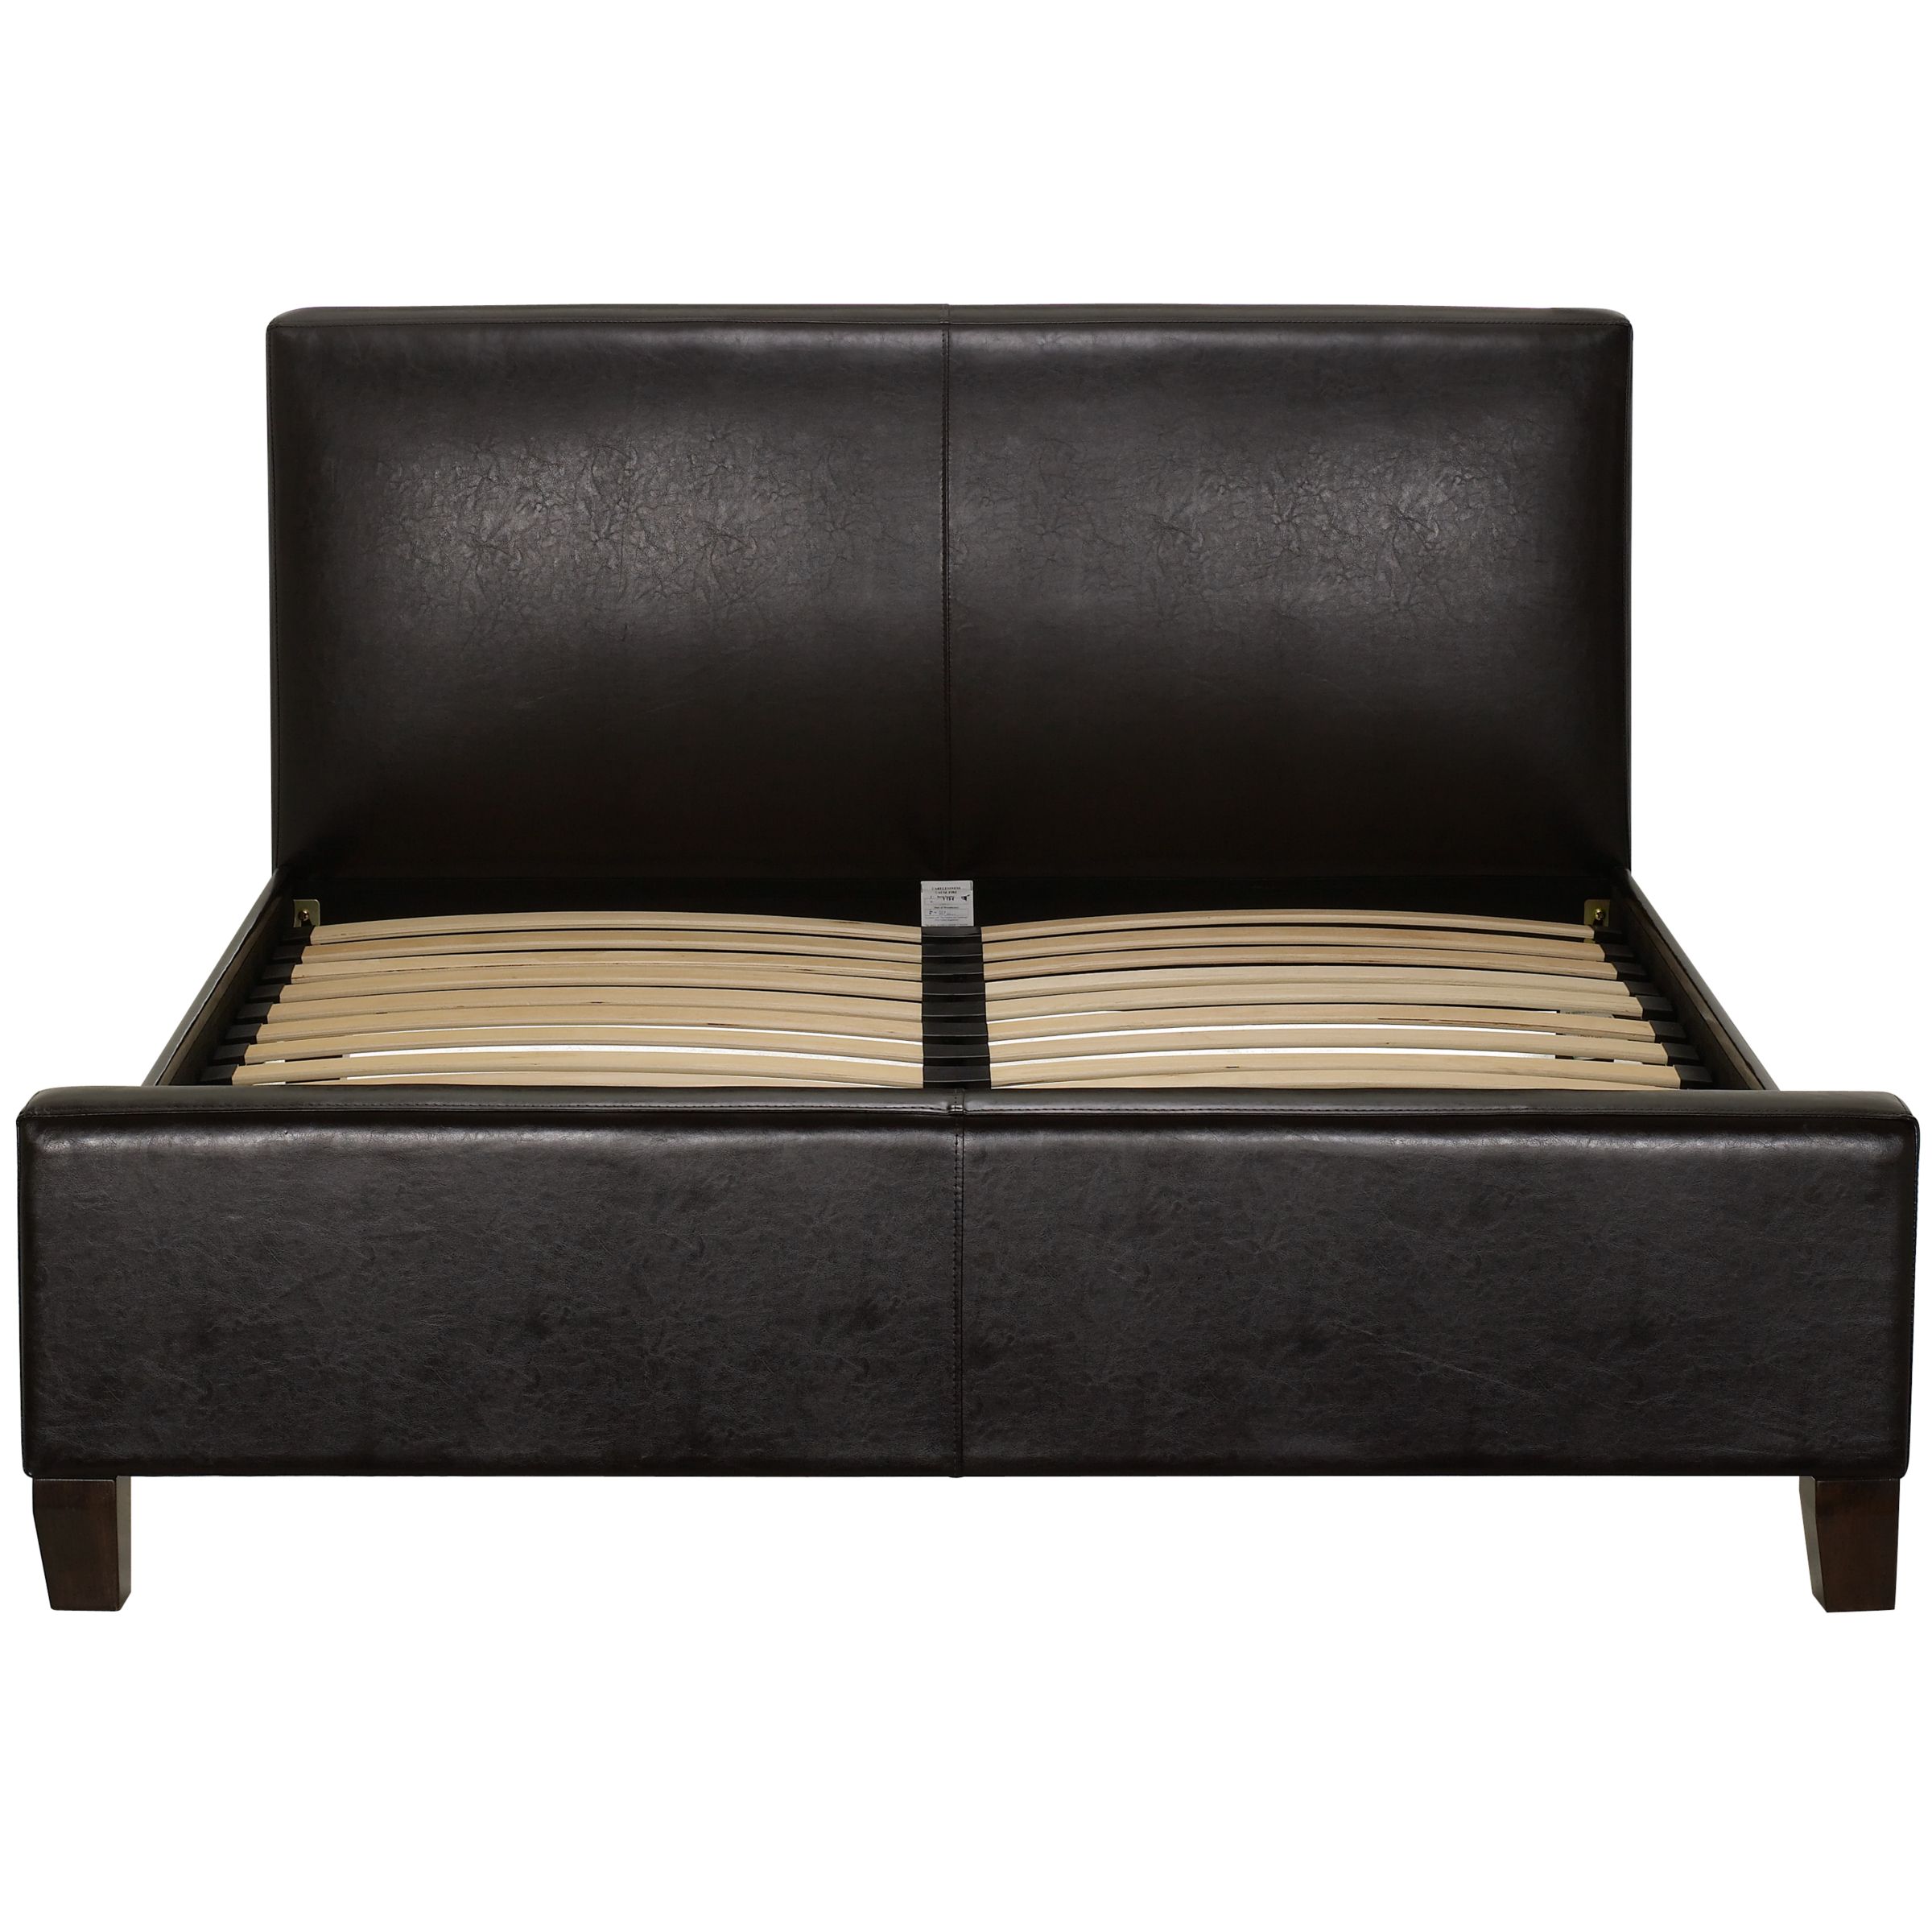 Calabria Faux Leather Bedstead, Chocolate, Small Double at John Lewis